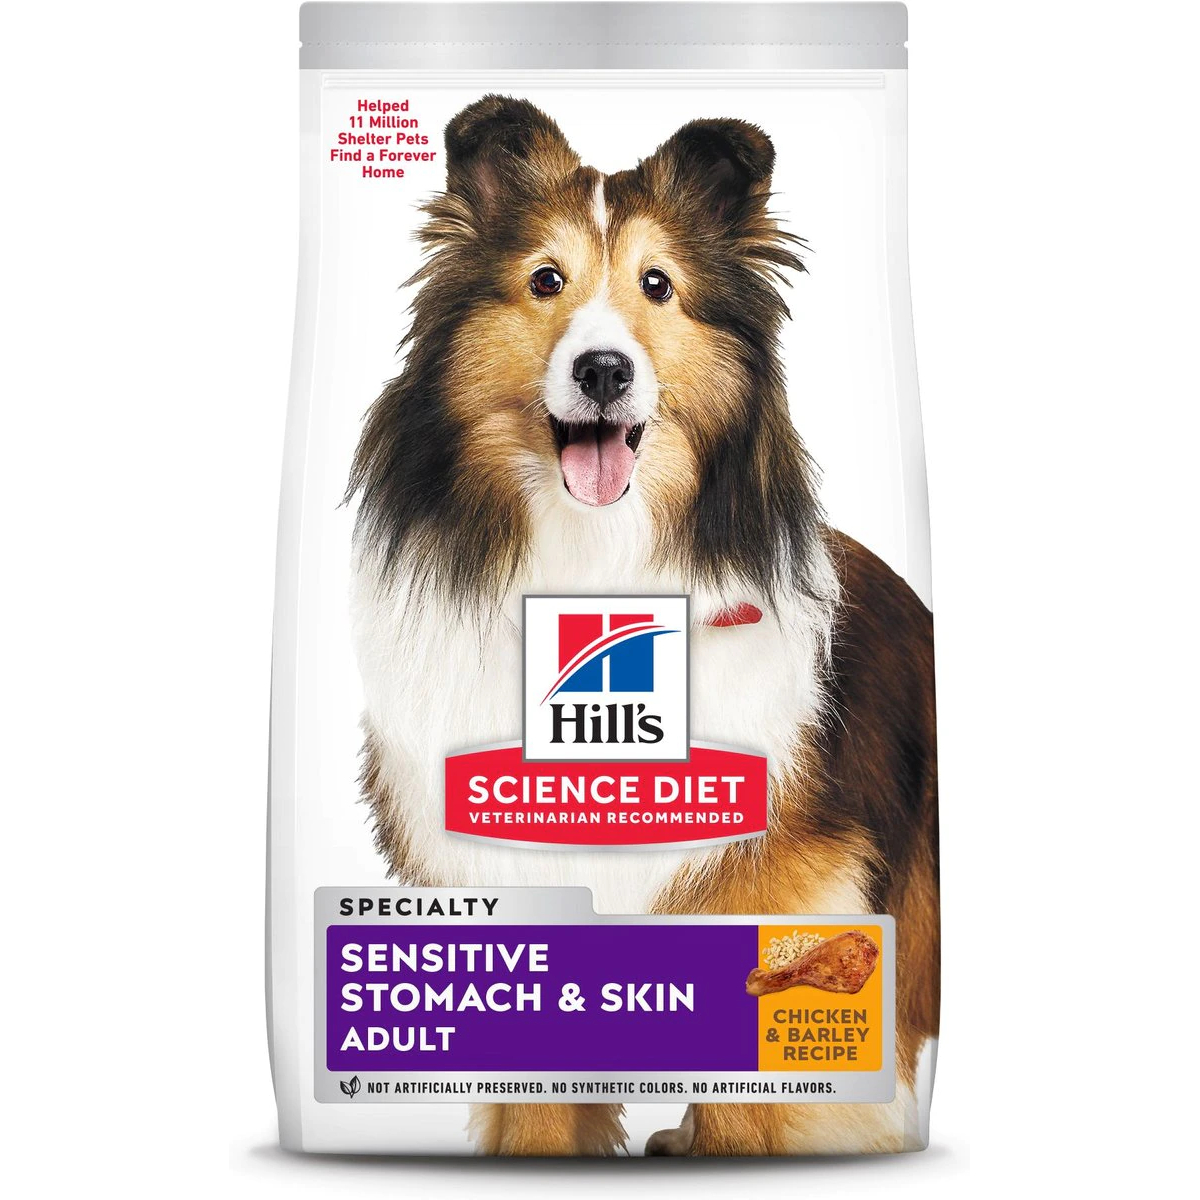 Hill's Science Diet Adult Sensitive Stomach & Sensitive Skin Chicken Recipe Dry Dog Food